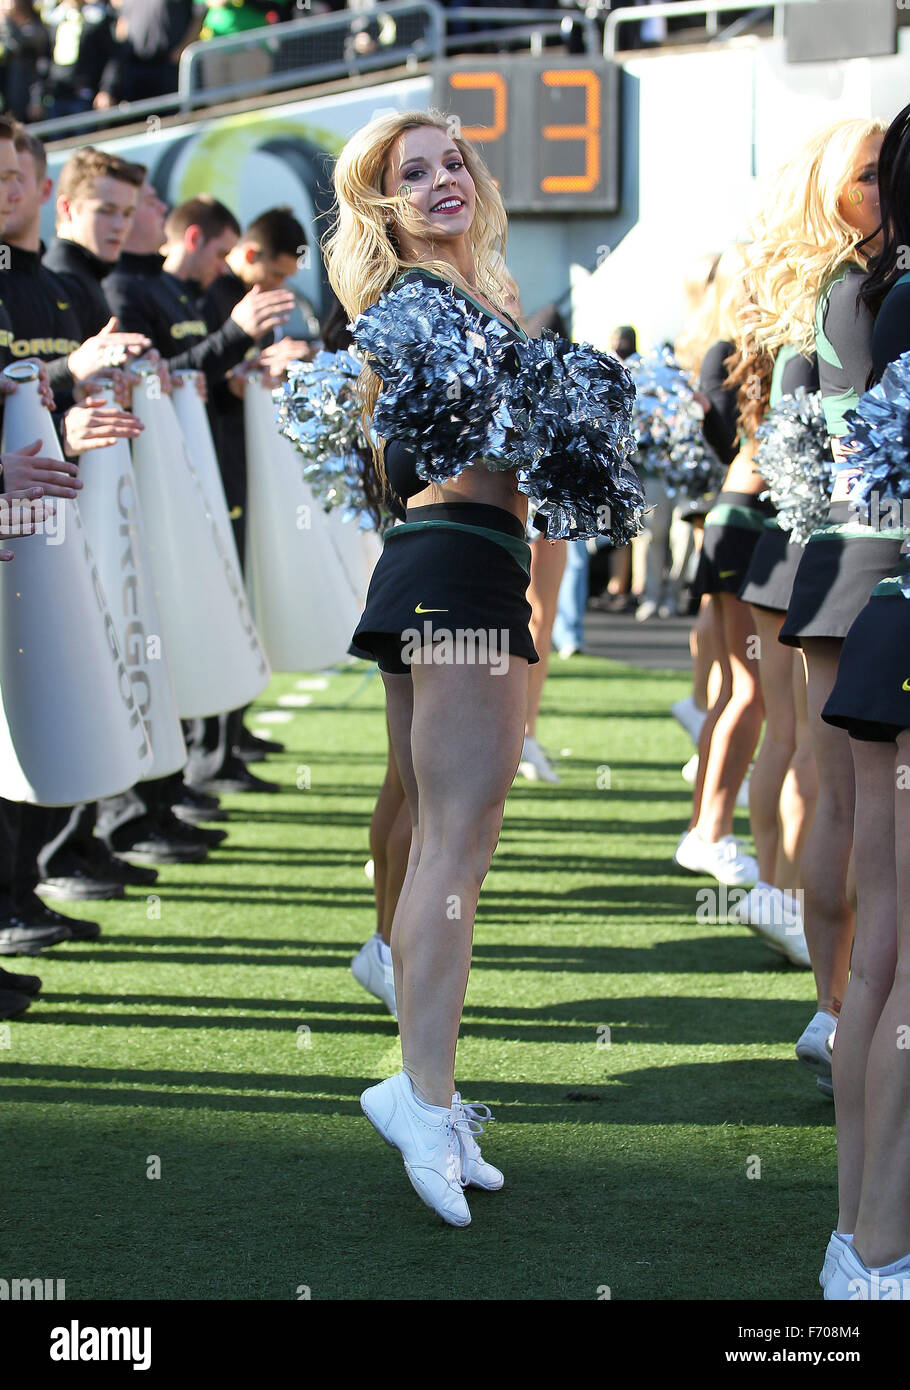 Autzen Stadium, Eugene, OR, USA. 21st Nov, 2015. An Oregon cheerleader entertains the crowd during the NCAA football game between the Ducks and the USC Trojans at Autzen Stadium, Eugene, OR. Larry C. Lawson/CSM/Alamy Live News Stock Photo